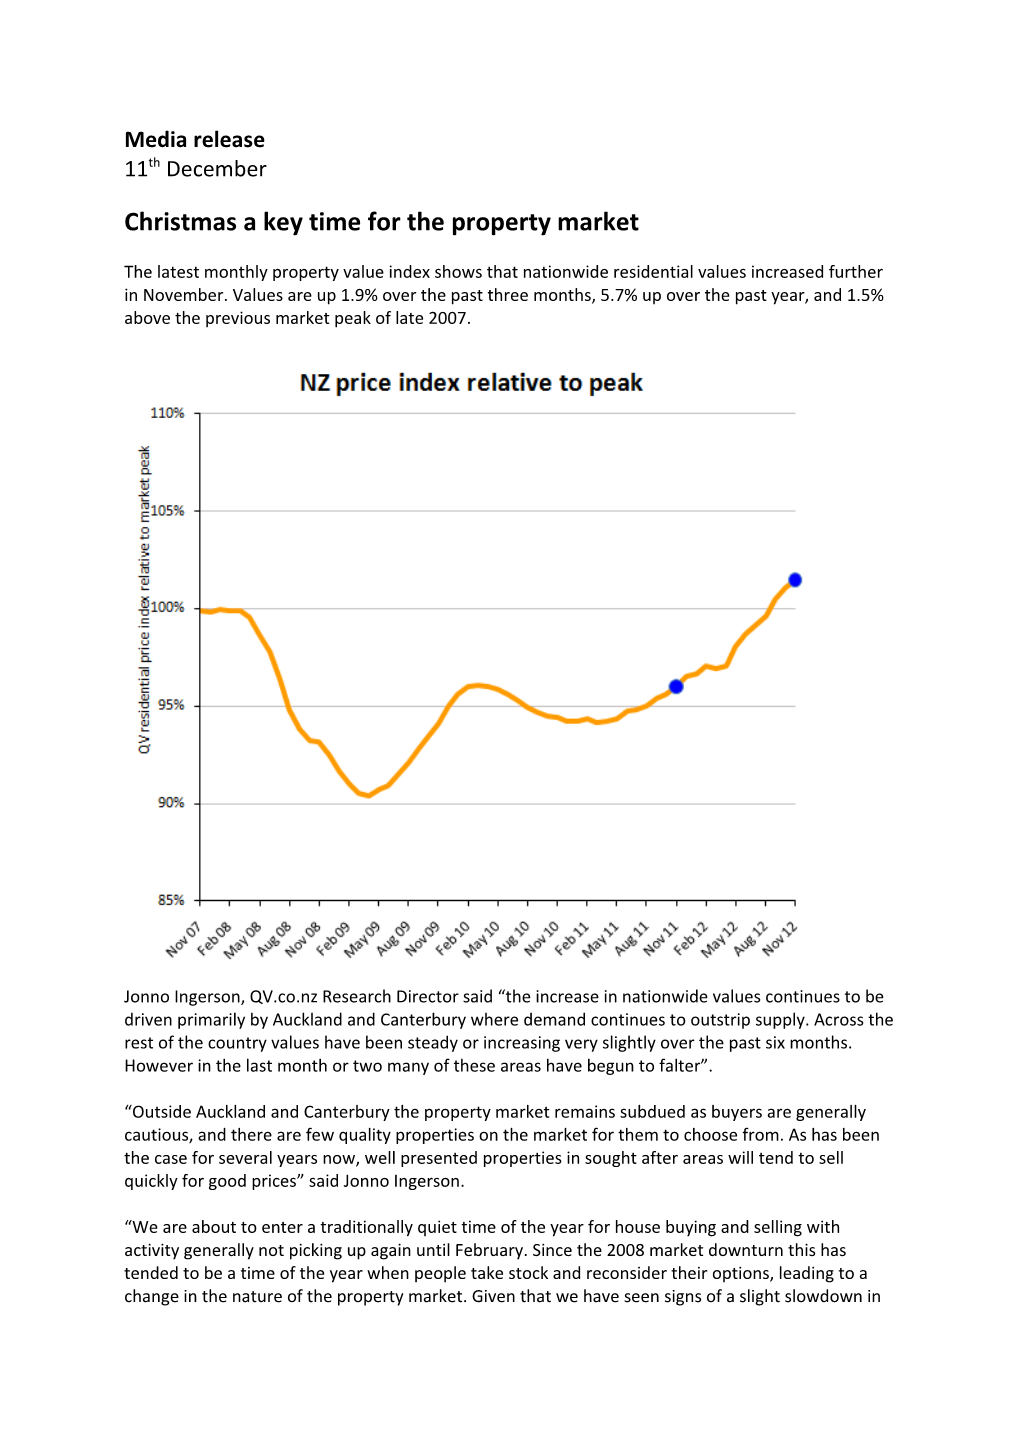 Christmas a Key Time for the Property Market